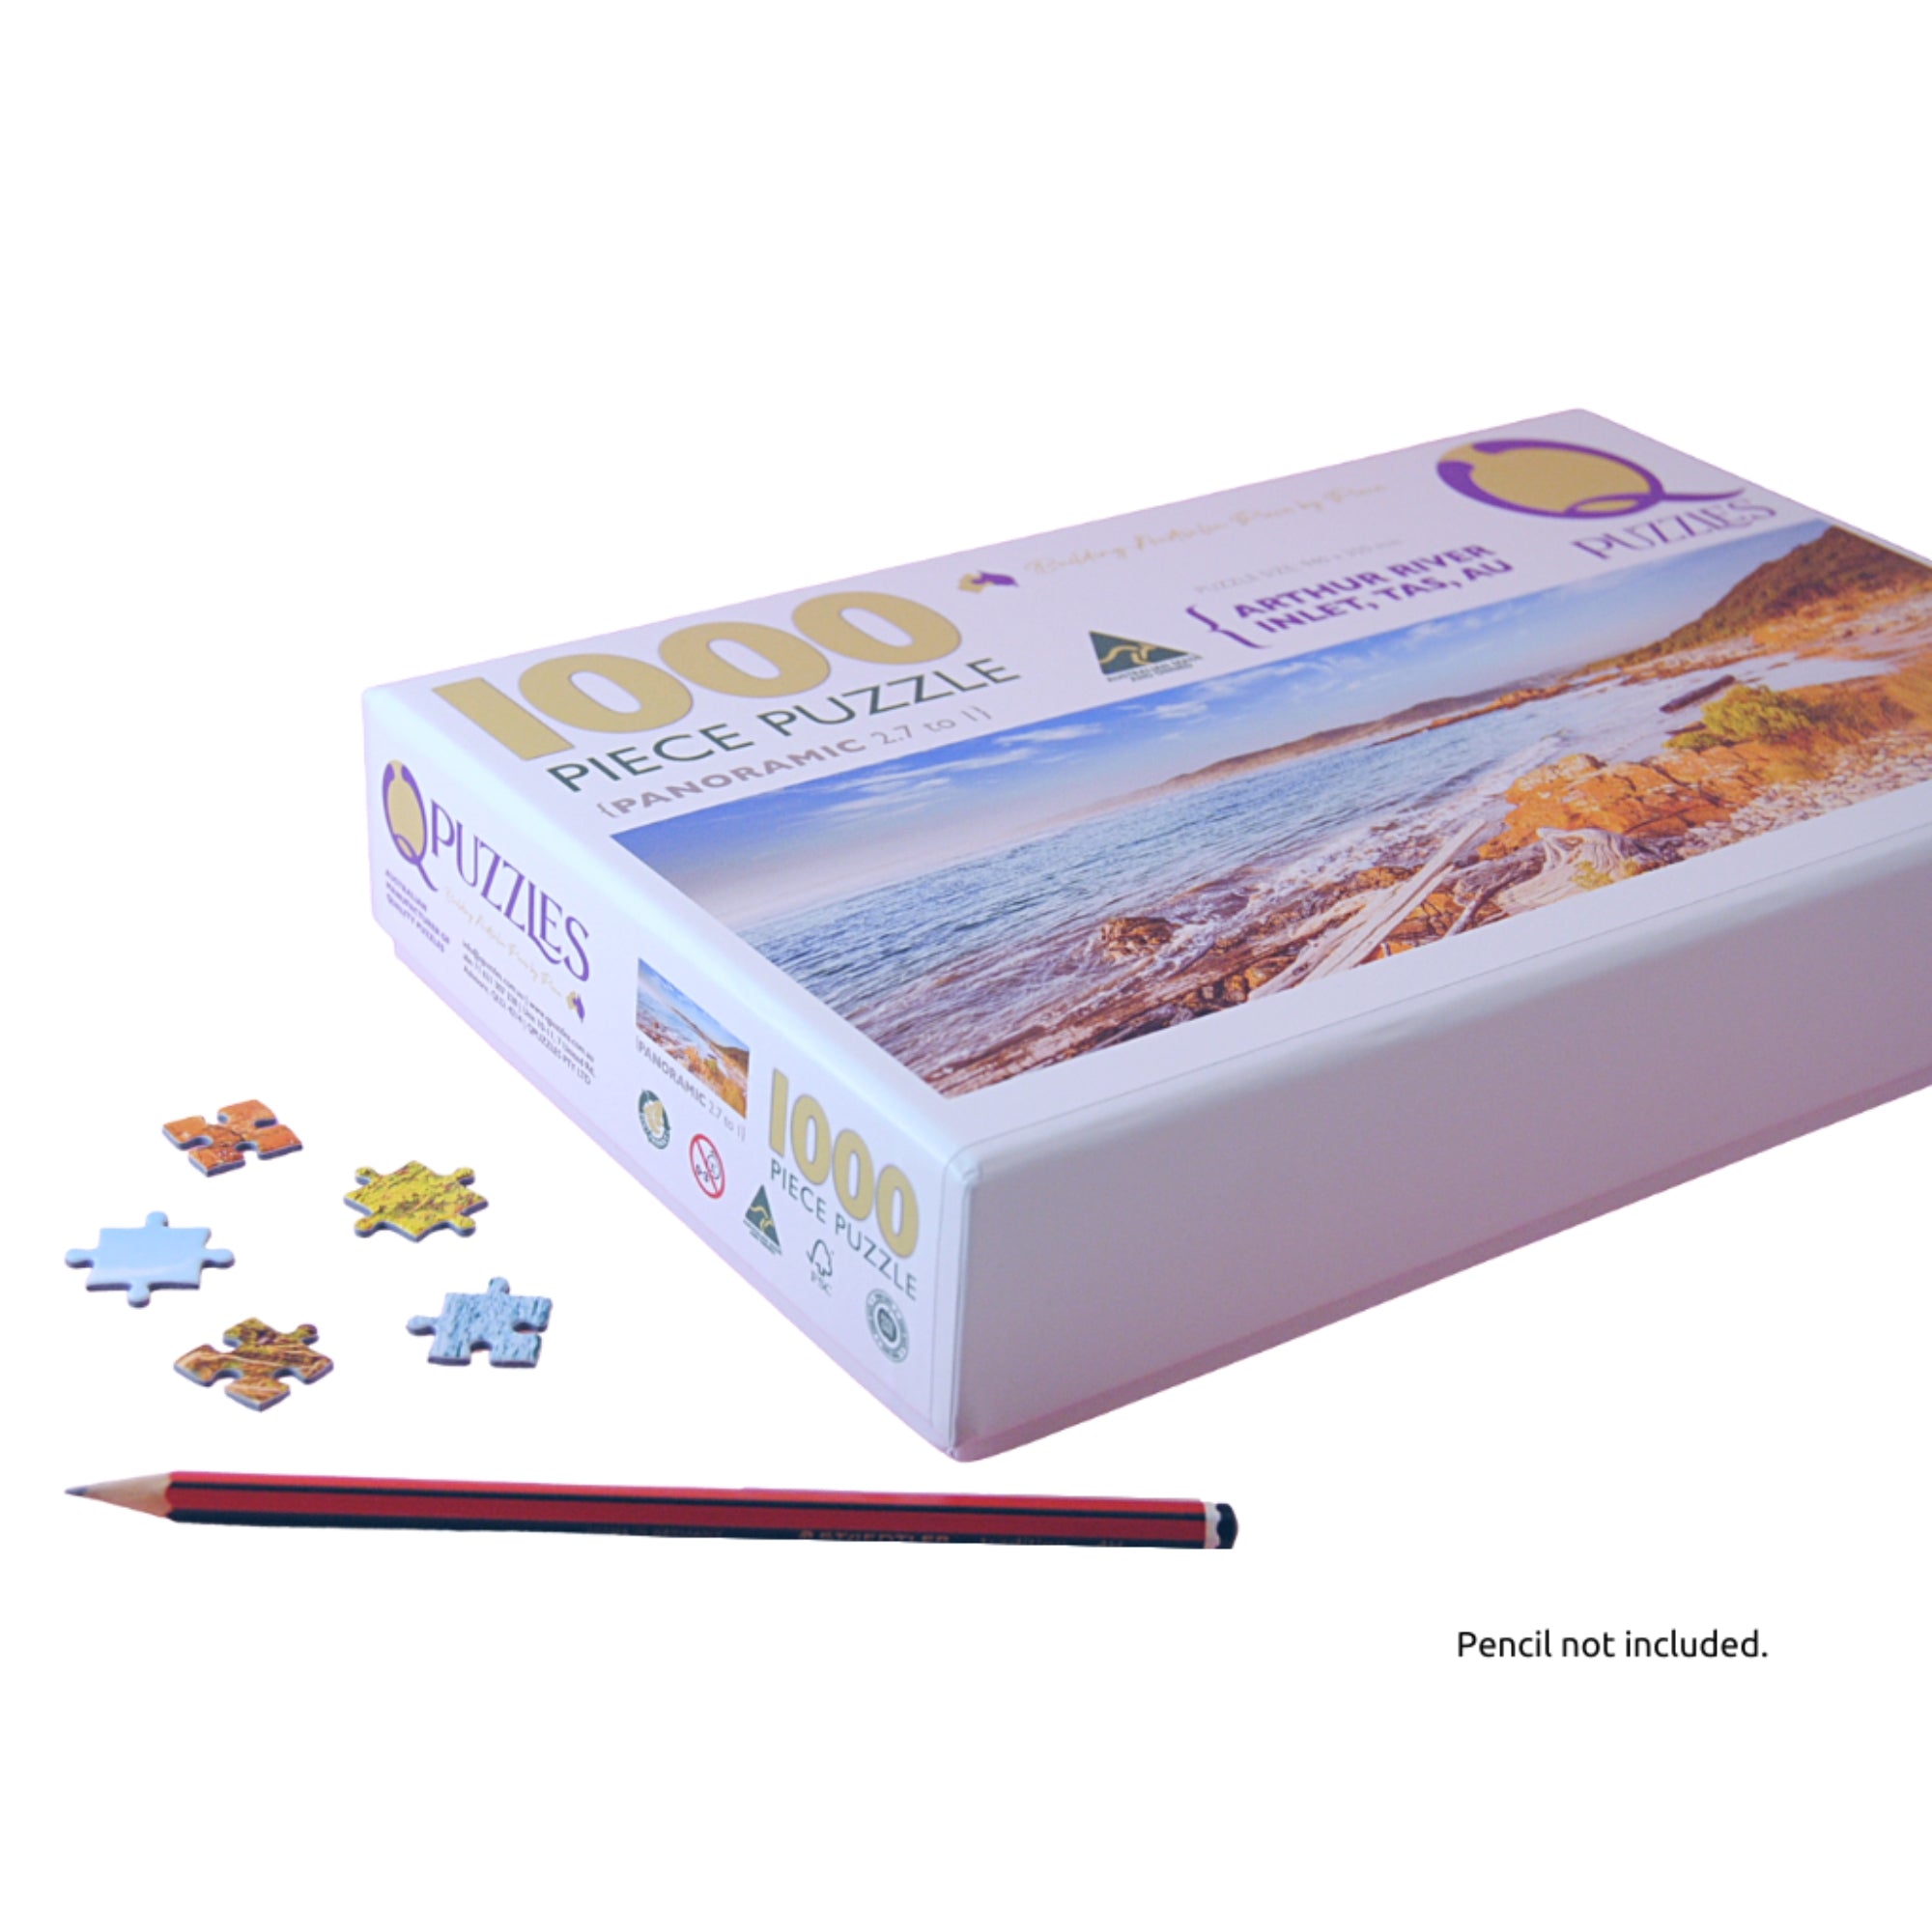 Australian made Arthur River Inlet 1000 piece jigsaw puzzle. Eco Friendly gift for family and friends.